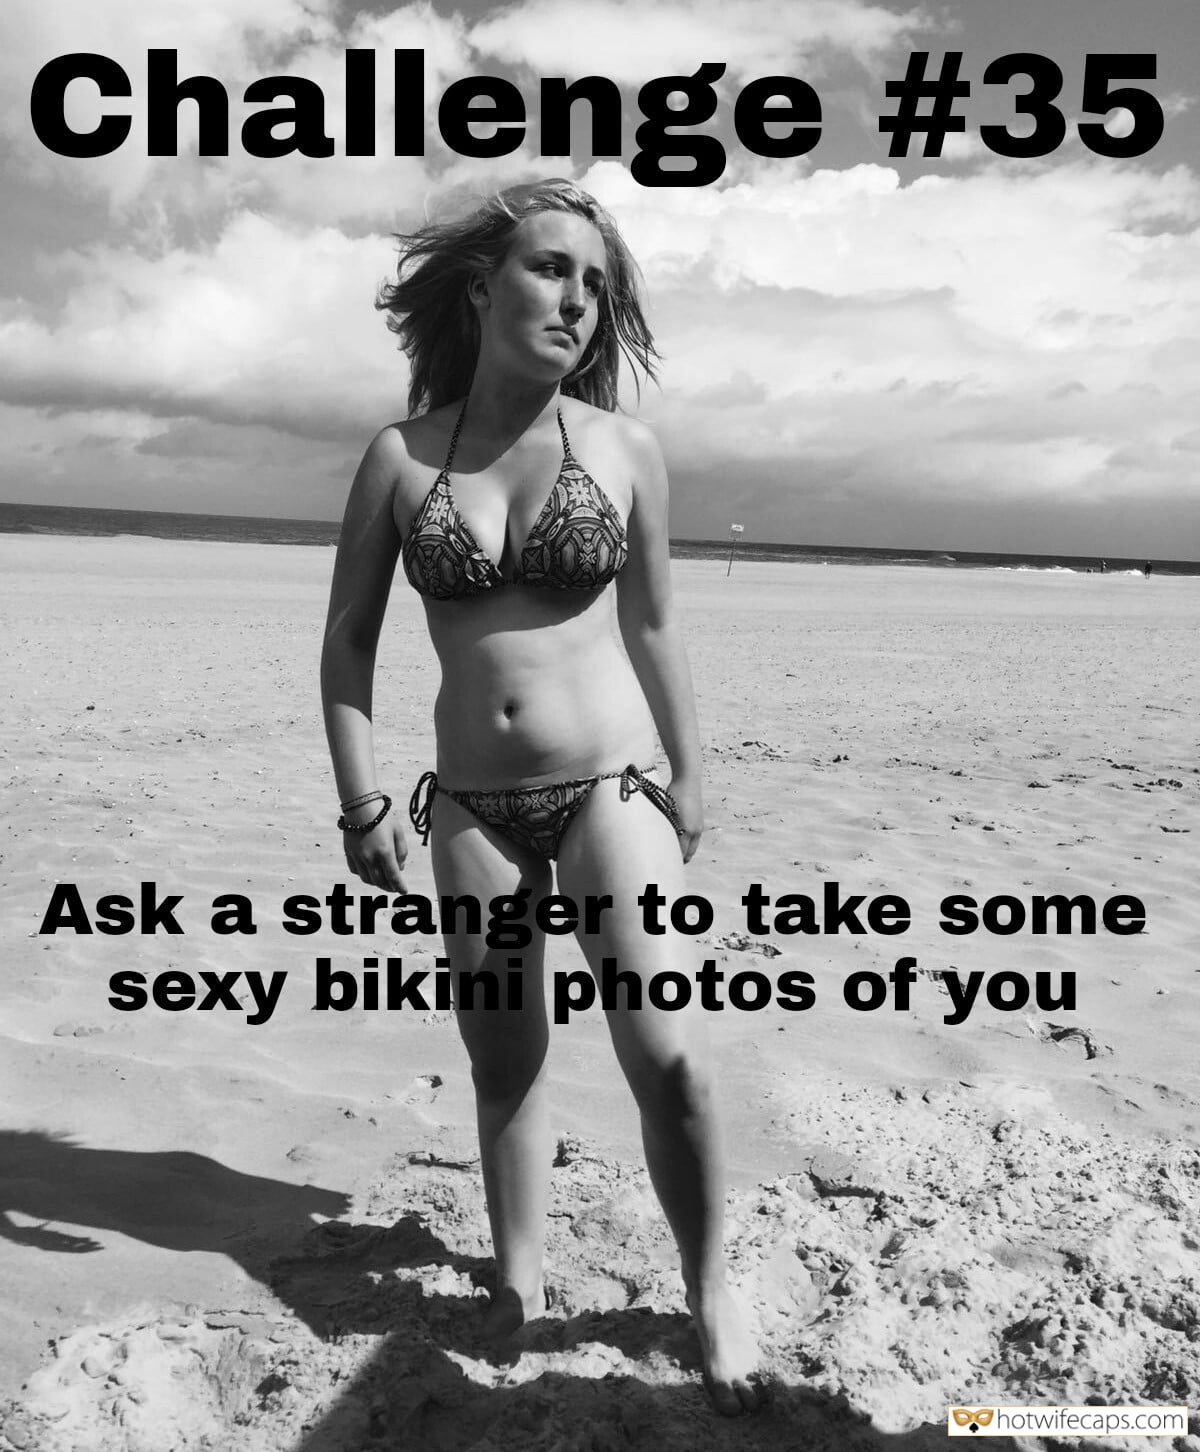 Challenges and Rules Hotwife Caption №560788 that is blessing for the stranger pic